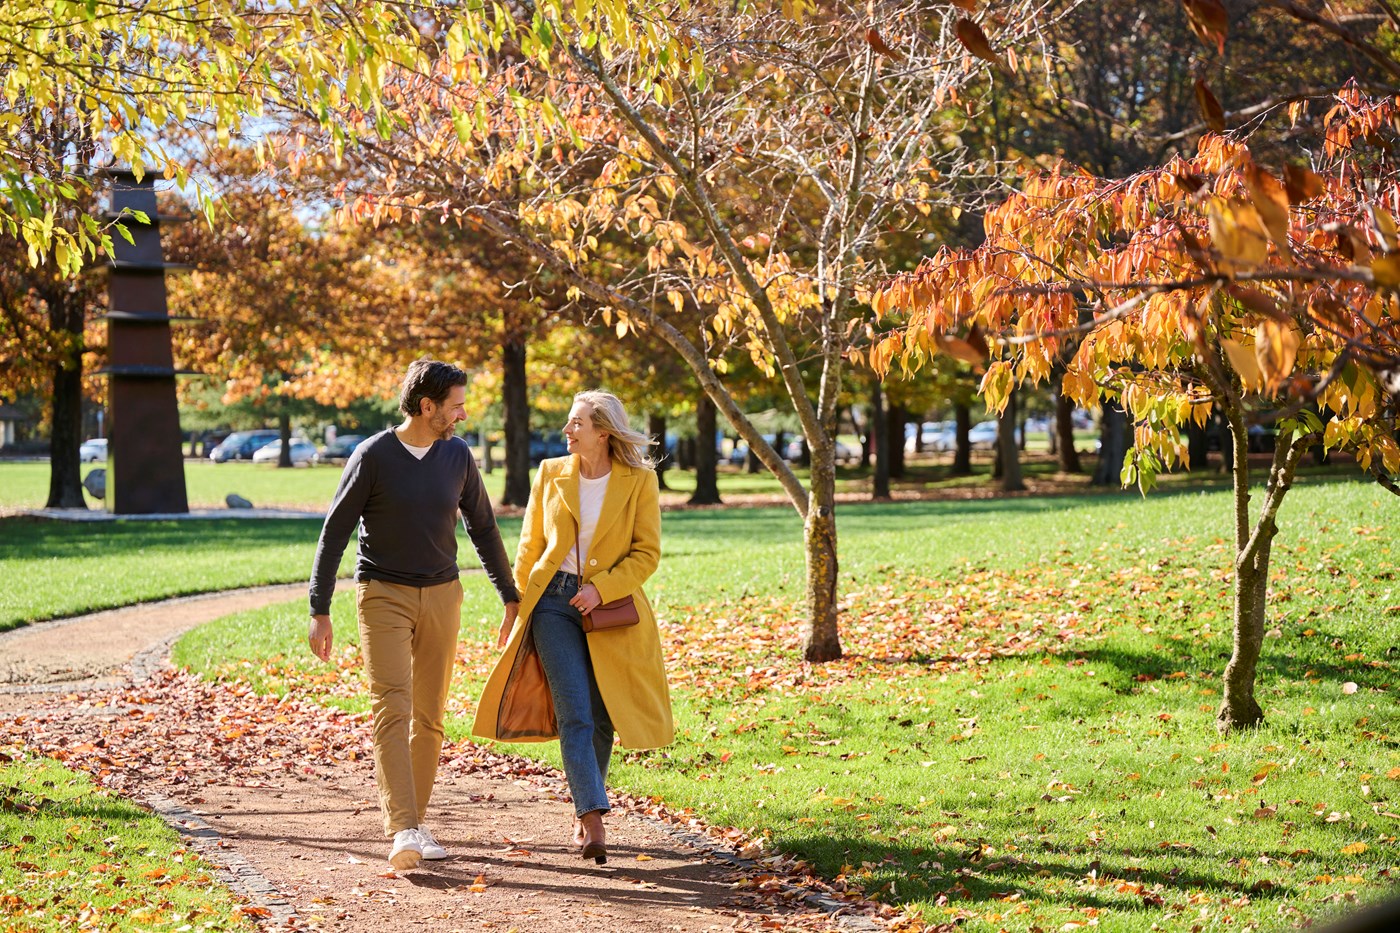 Woman in yellow coat walks with a man in warm clothes thorugh park with orange and yellow leaves at Nara Peace Park Canberra